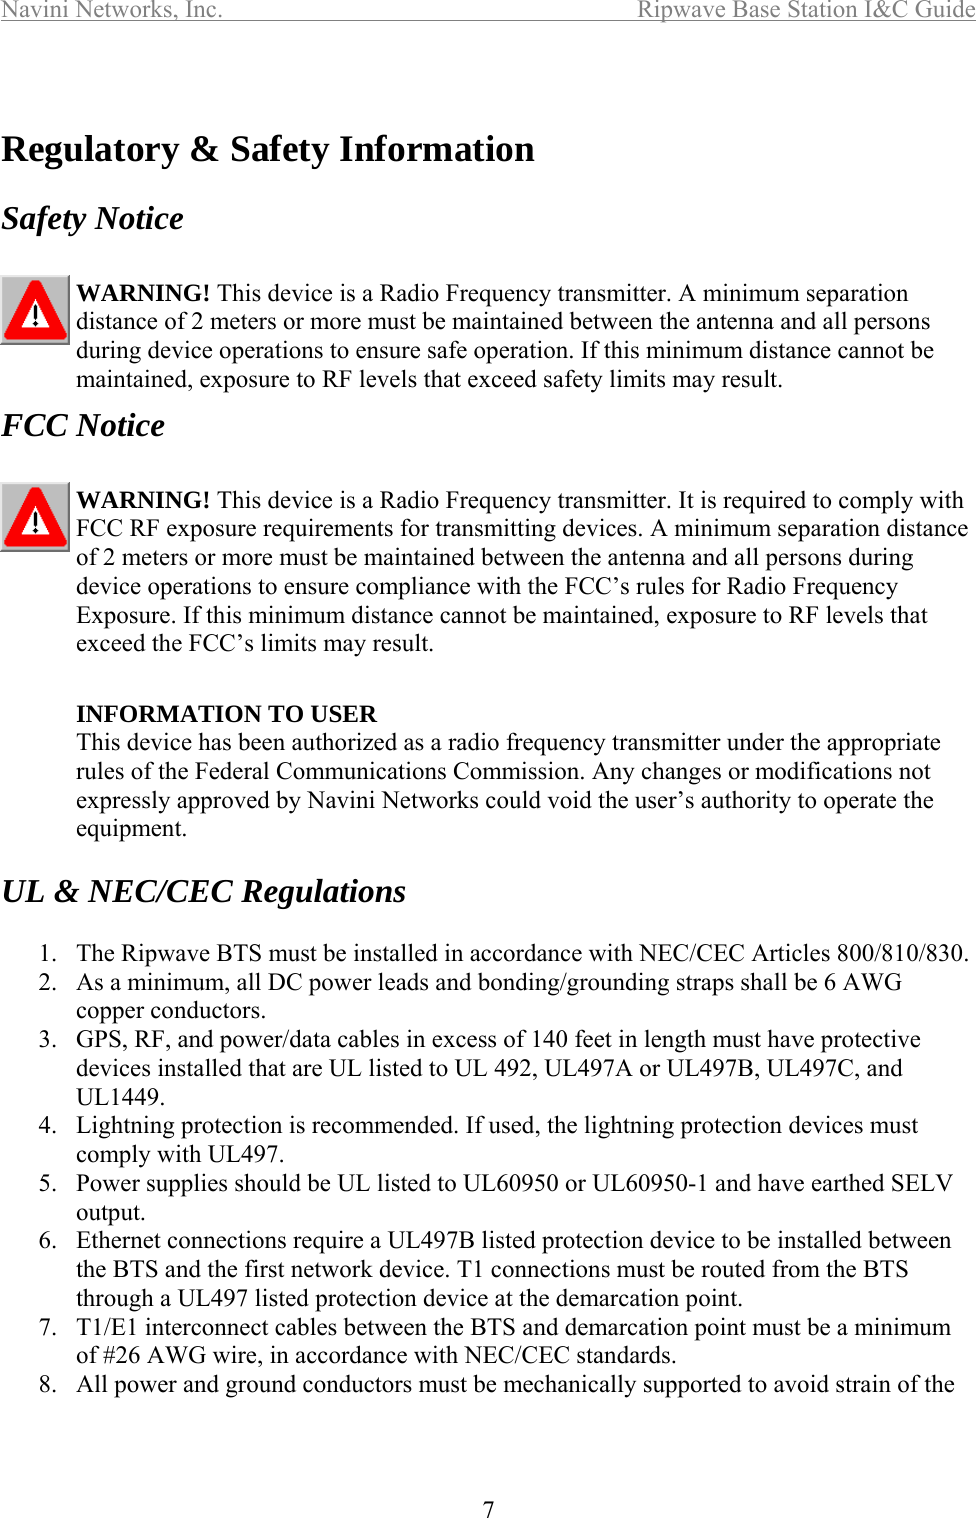 Navini Networks, Inc.  Ripwave Base Station I&amp;C Guide  7   Regulatory &amp; Safety Information  Safety Notice  WARNING! This device is a Radio Frequency transmitter. A minimum separation distance of 2 meters or more must be maintained between the antenna and all persons during device operations to ensure safe operation. If this minimum distance cannot be maintained, exposure to RF levels that exceed safety limits may result.  FCC Notice  WARNING! This device is a Radio Frequency transmitter. It is required to comply with FCC RF exposure requirements for transmitting devices. A minimum separation distance of 2 meters or more must be maintained between the antenna and all persons during device operations to ensure compliance with the FCC’s rules for Radio Frequency Exposure. If this minimum distance cannot be maintained, exposure to RF levels that exceed the FCC’s limits may result.   INFORMATION TO USER This device has been authorized as a radio frequency transmitter under the appropriate rules of the Federal Communications Commission. Any changes or modifications not expressly approved by Navini Networks could void the user’s authority to operate the equipment.  UL &amp; NEC/CEC Regulations  1.  The Ripwave BTS must be installed in accordance with NEC/CEC Articles 800/810/830. 2.  As a minimum, all DC power leads and bonding/grounding straps shall be 6 AWG copper conductors. 3.  GPS, RF, and power/data cables in excess of 140 feet in length must have protective devices installed that are UL listed to UL 492, UL497A or UL497B, UL497C, and UL1449. 4.  Lightning protection is recommended. If used, the lightning protection devices must comply with UL497. 5.  Power supplies should be UL listed to UL60950 or UL60950-1 and have earthed SELV output. 6.  Ethernet connections require a UL497B listed protection device to be installed between the BTS and the first network device. T1 connections must be routed from the BTS through a UL497 listed protection device at the demarcation point. 7.  T1/E1 interconnect cables between the BTS and demarcation point must be a minimum of #26 AWG wire, in accordance with NEC/CEC standards. 8.  All power and ground conductors must be mechanically supported to avoid strain of the 